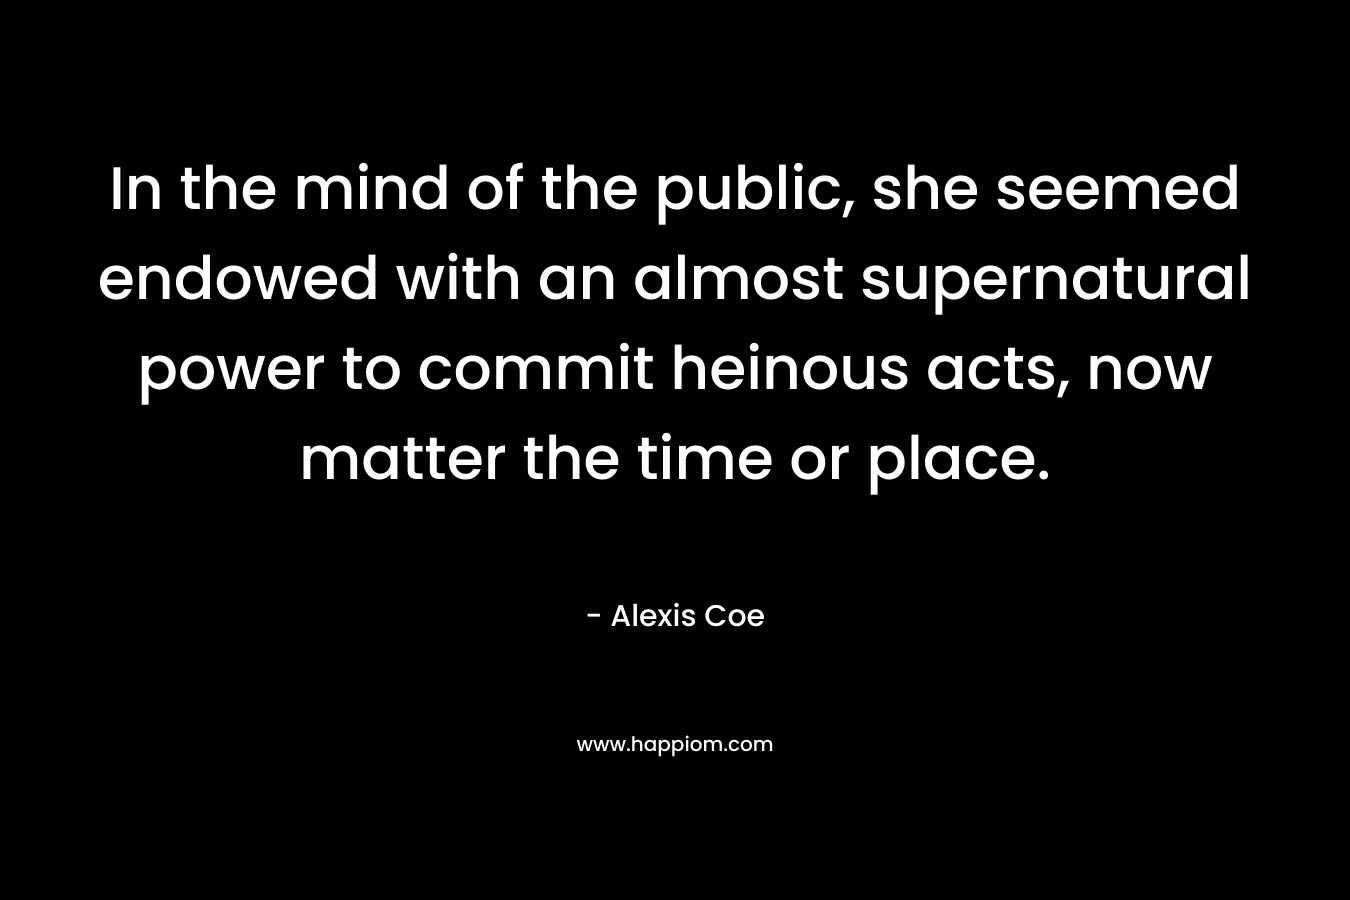 In the mind of the public, she seemed endowed with an almost supernatural power to commit heinous acts, now matter the time or place.